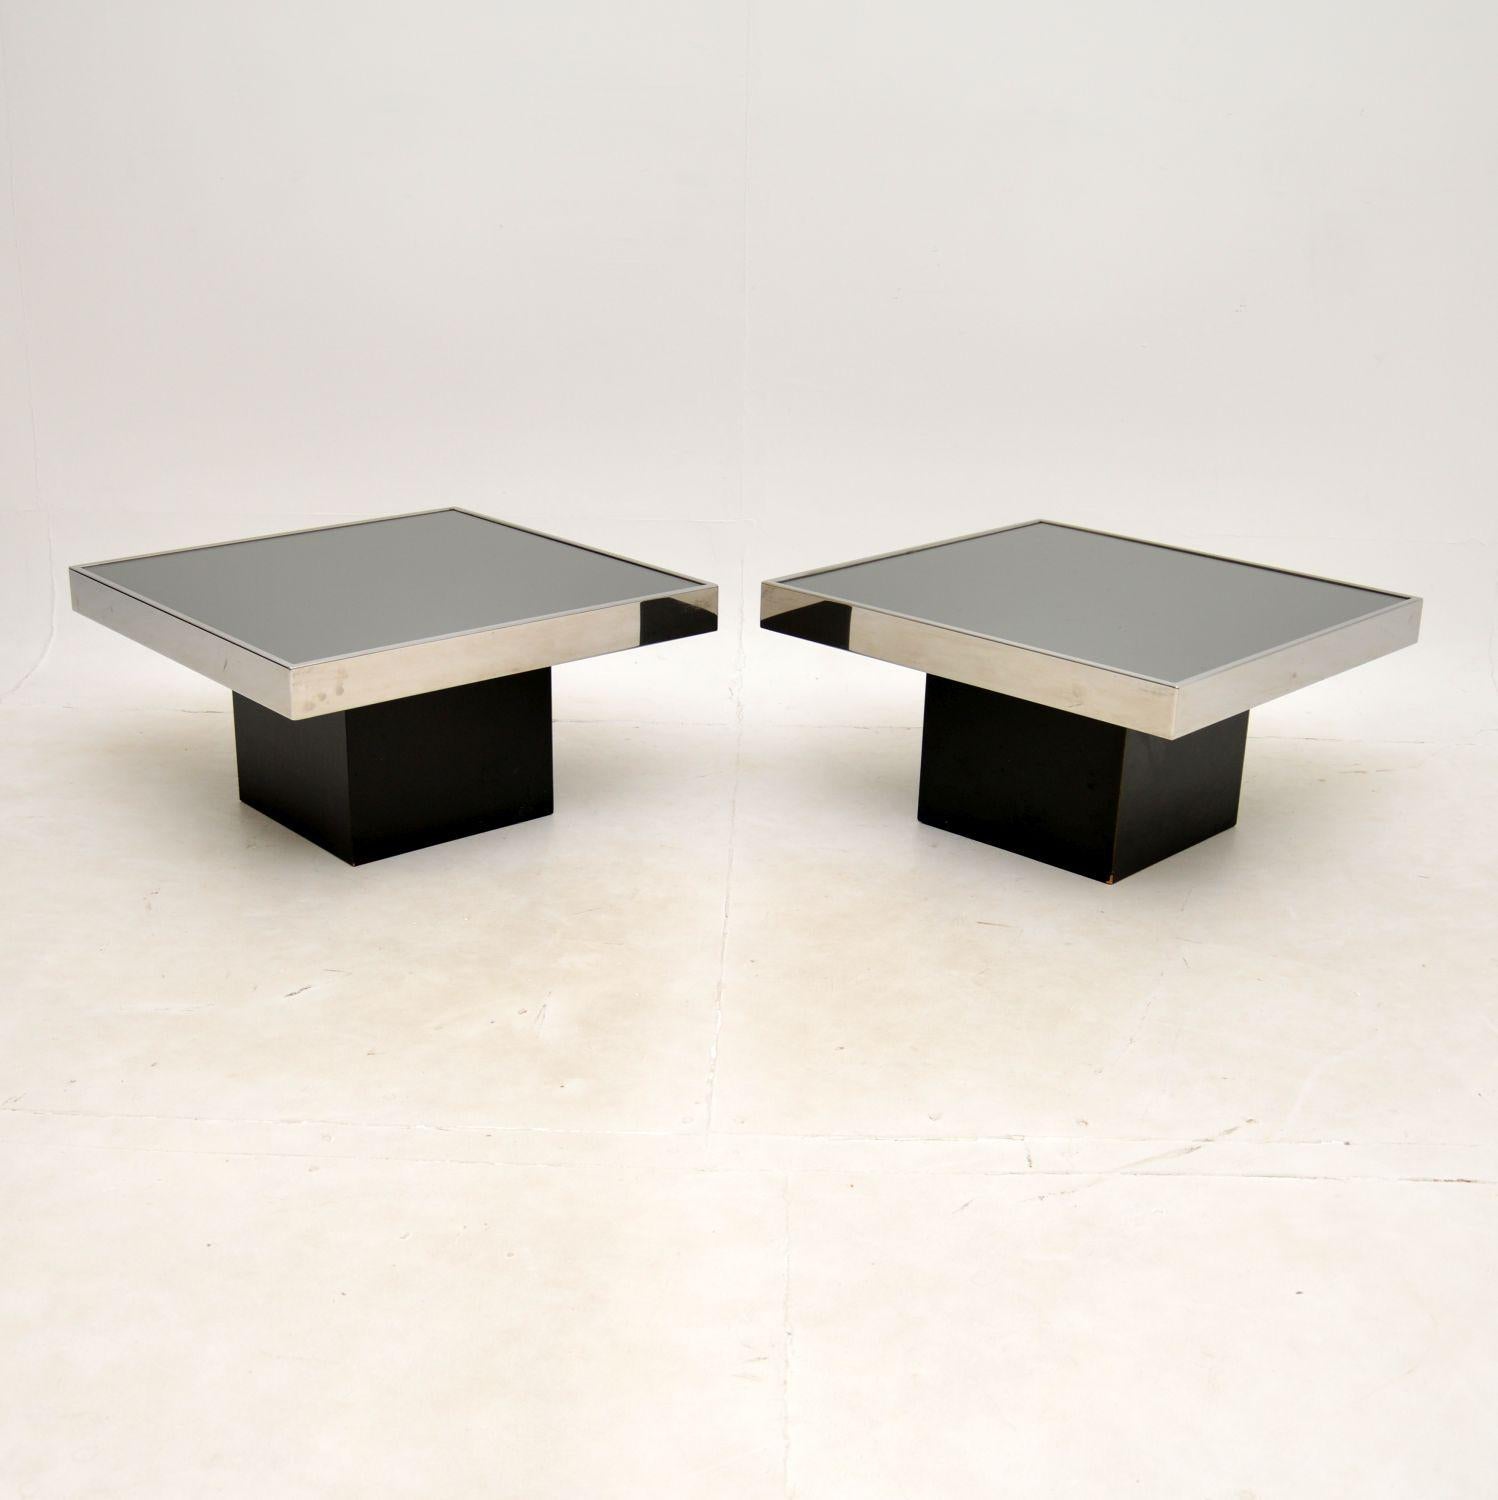 A very stylish and extremely well made pair of vintage Italian side tables by Willy Rizzo for Cidue. They were made in Italy, and date from the 1970’s.

The quality is outstanding, the slightly smoked mirrored tops are set within chrome frames, and